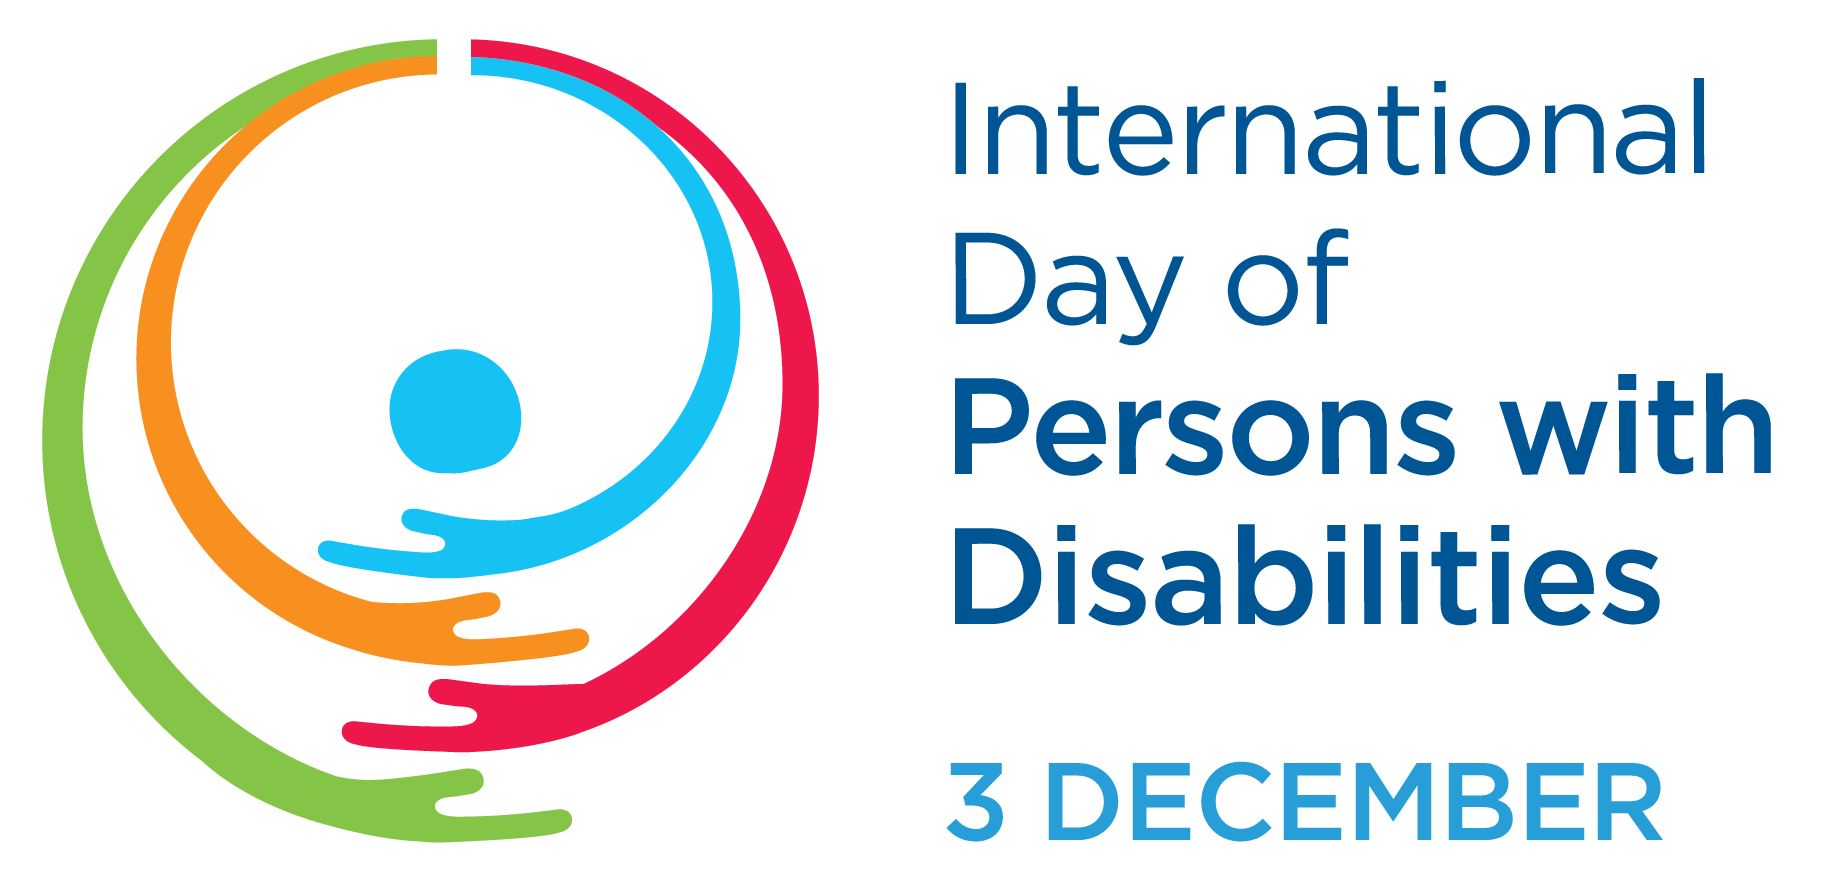 International Day of Persons with Disabilities Month logo